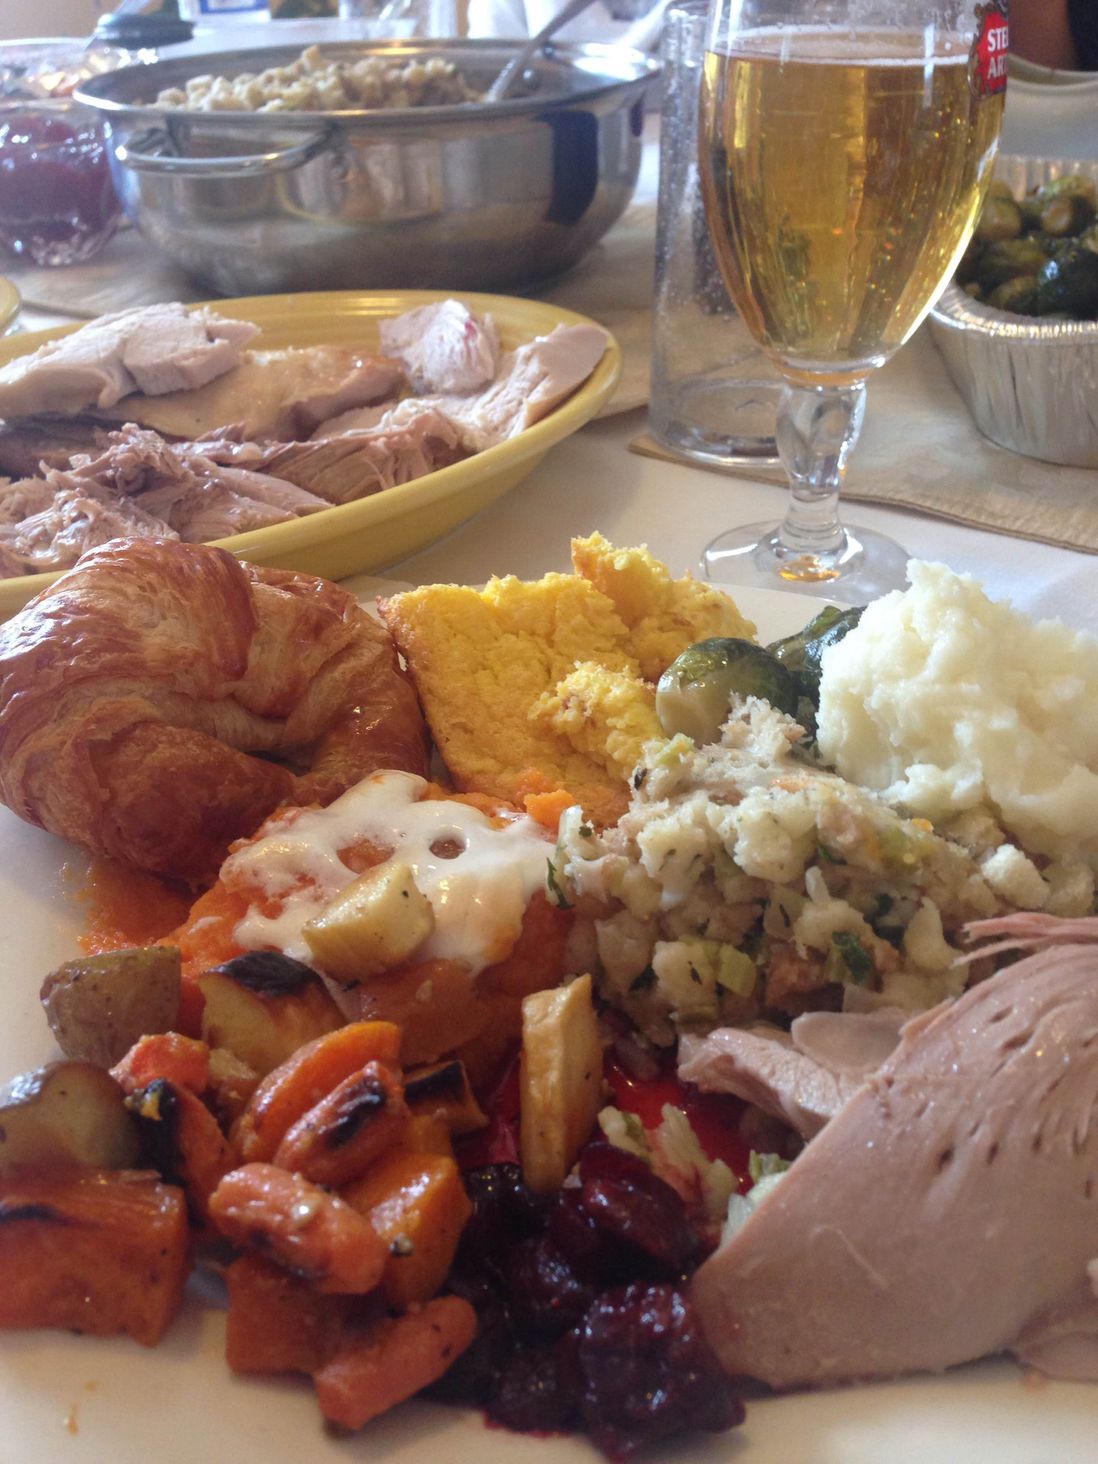 What we have here is corn pudding, maple Brussels sprouts, roasted root vegetables, candied yams, mashed potatoes, cranberry cherry compote, a croissant, Grandma Janet's famous stuffing and a slice of bird (for photo purposes only) as well as a chalice of Stella (not a glass). - Morgan Walters